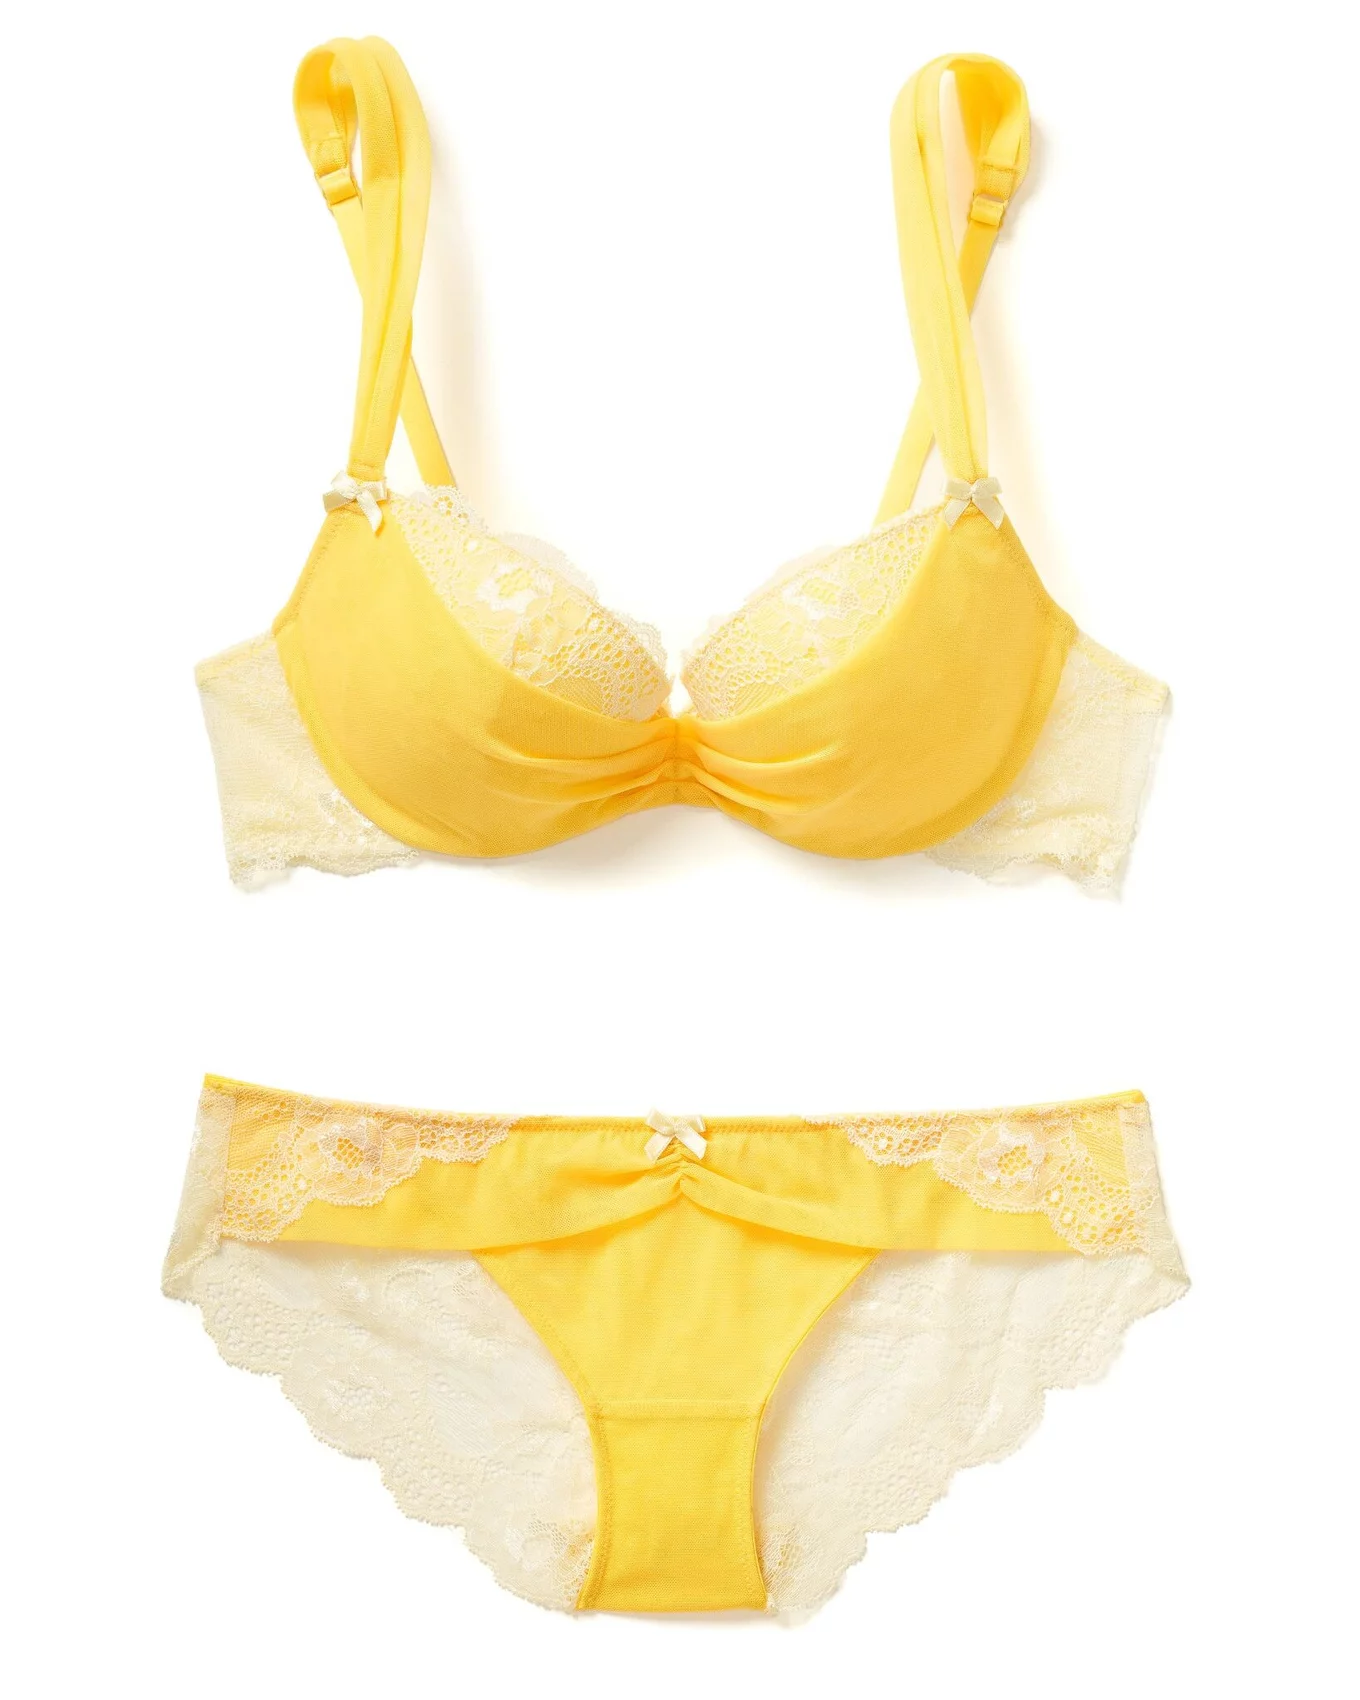 Meikedai Neon Yellow Lingerie Sensual Womens Underwear 3 Pieces Lace Bra  Kit Push Up S Xl Embroidery Breves Sets Garte Cup Size S Color Fluorescent  Yellow